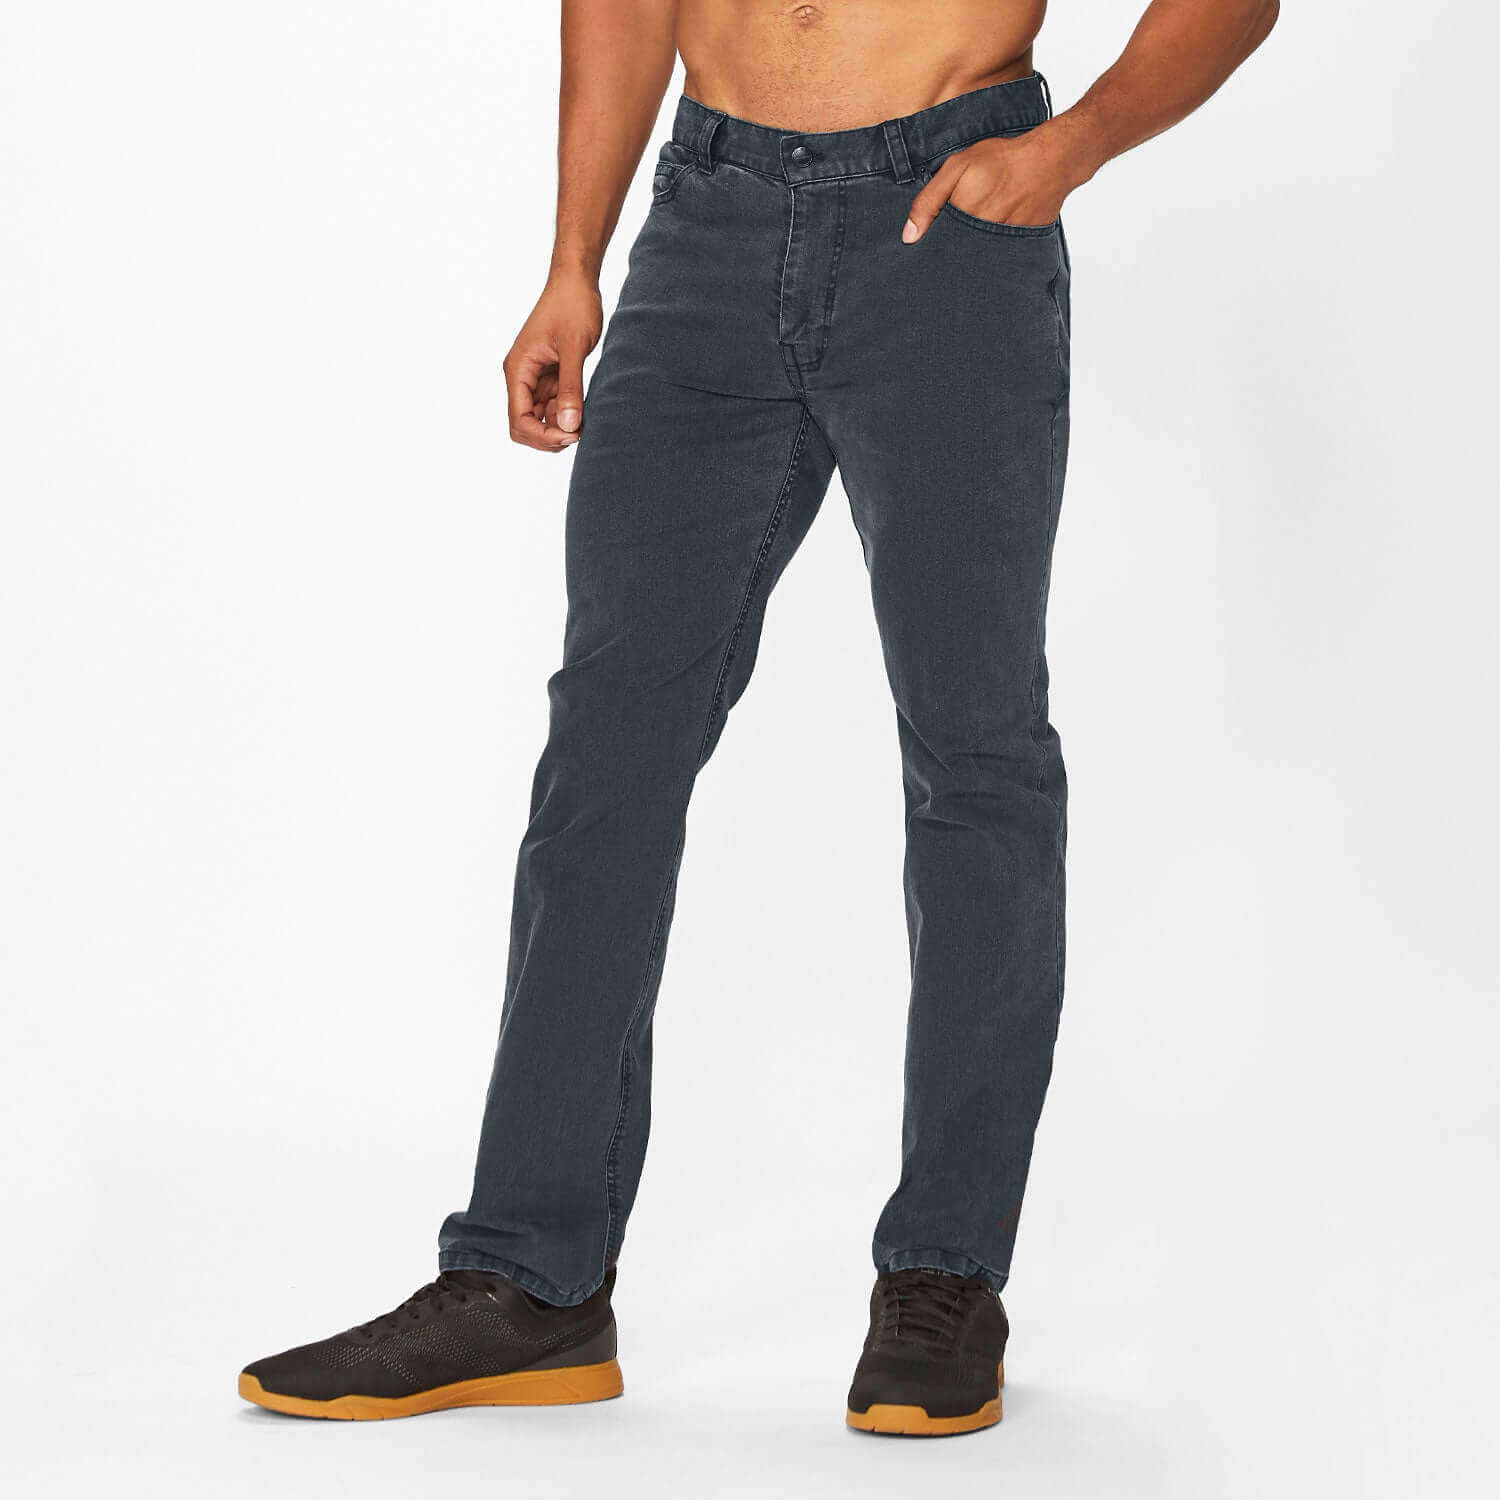 Boxer jeans Today 5pm pst The boxers are built in to the jeans